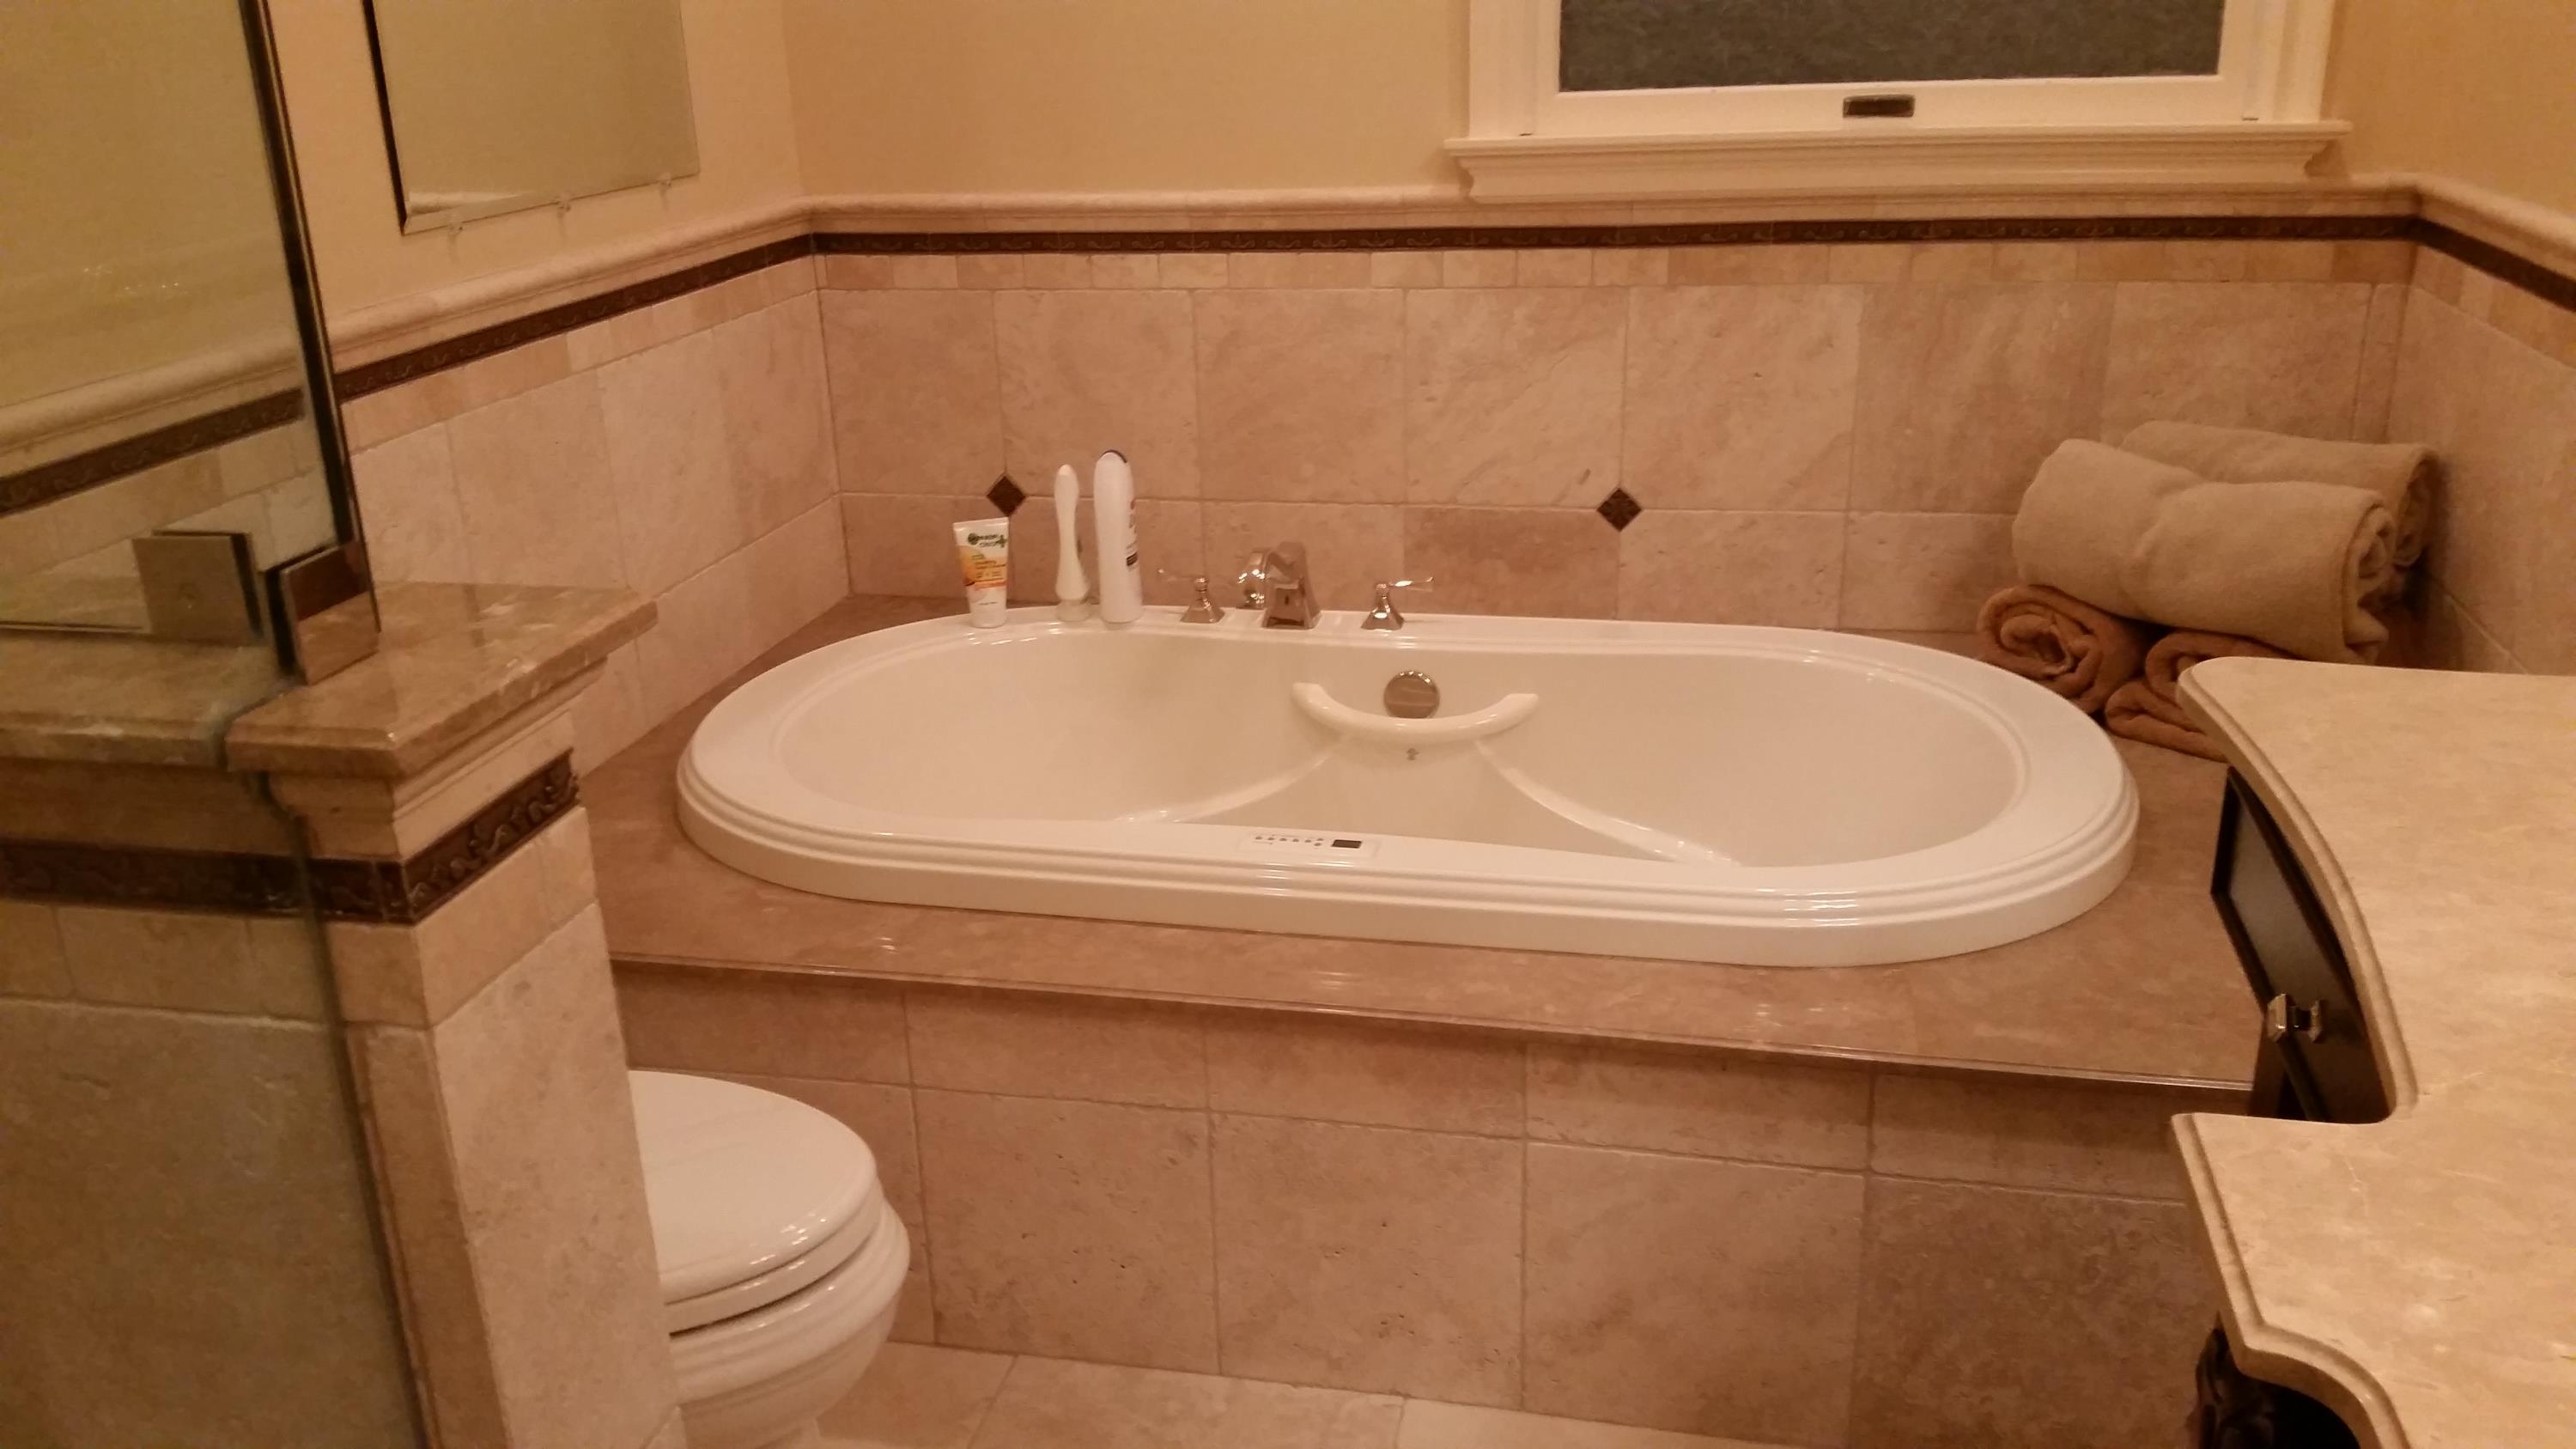 Finished bathroom remodeling project with tub